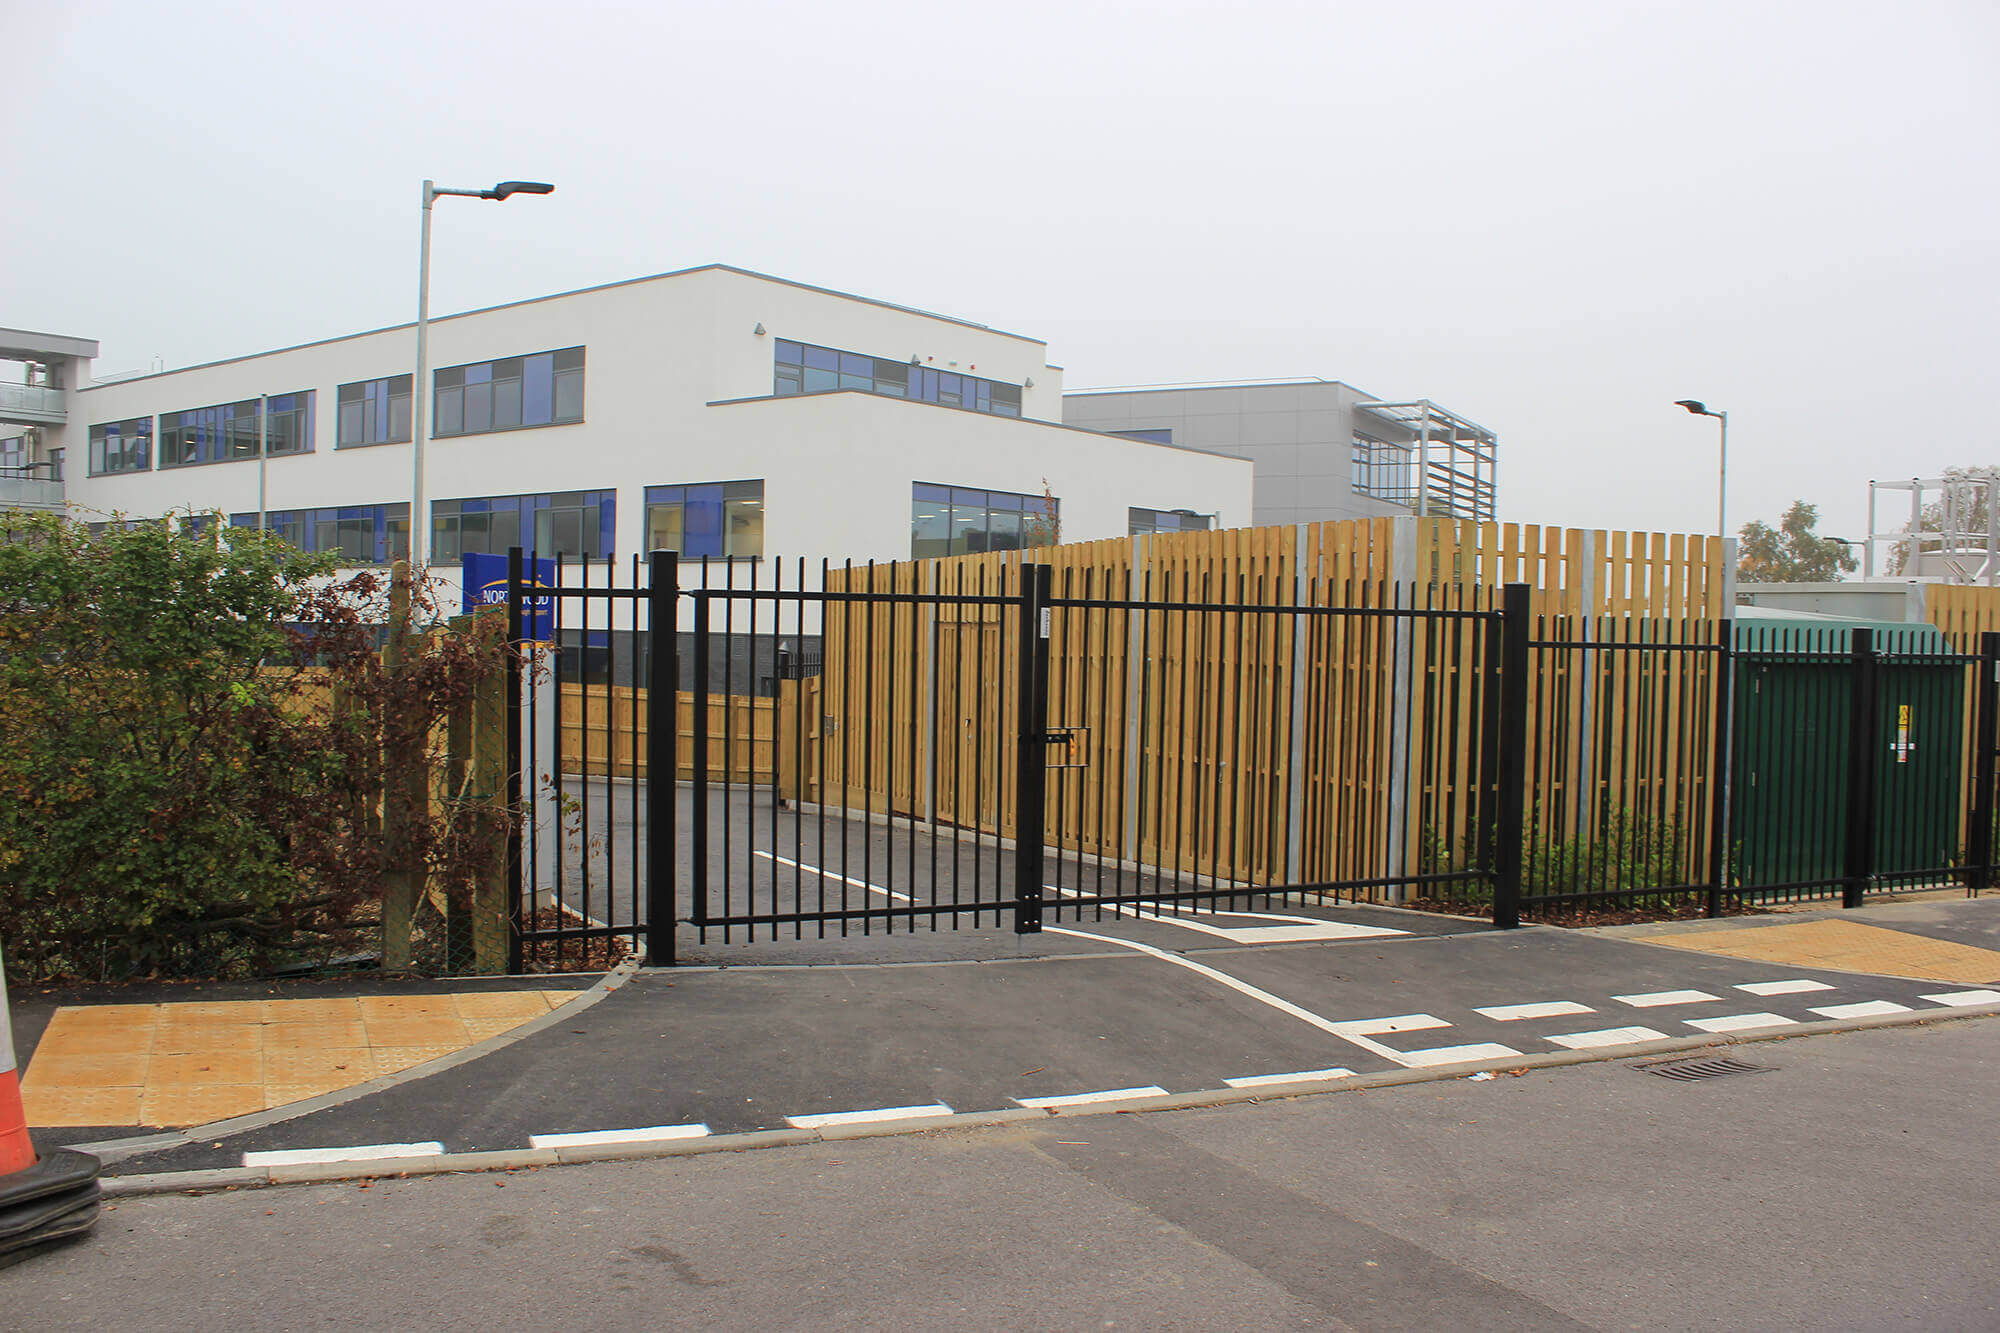 School fencing and gates